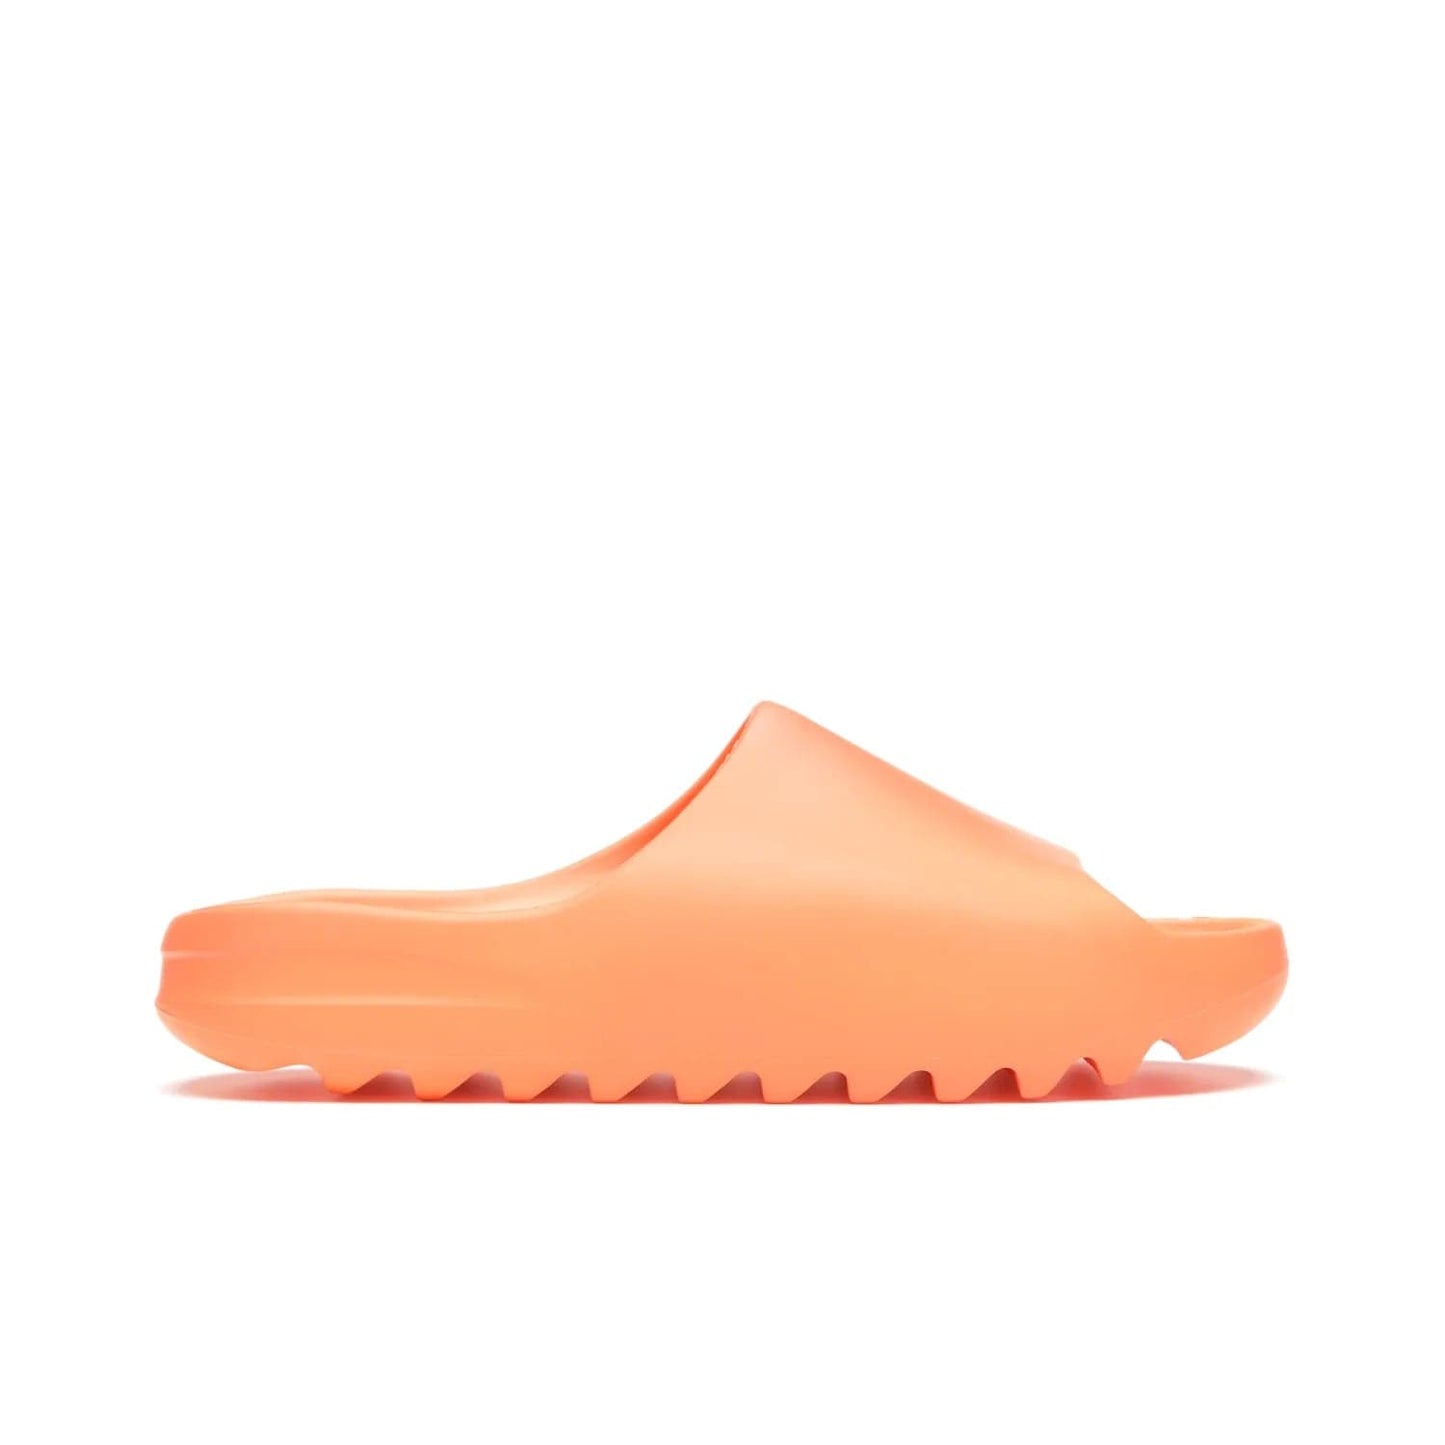 adidas Yeezy Slide Enflame Orange - Image 1 - Only at www.BallersClubKickz.com - Limited edition adidas Yeezy Slide featuring a bold Enflame Orange upper and EVA foam construction. Grooved outsole for traction and support. Released June 2021. Perfect for summer.